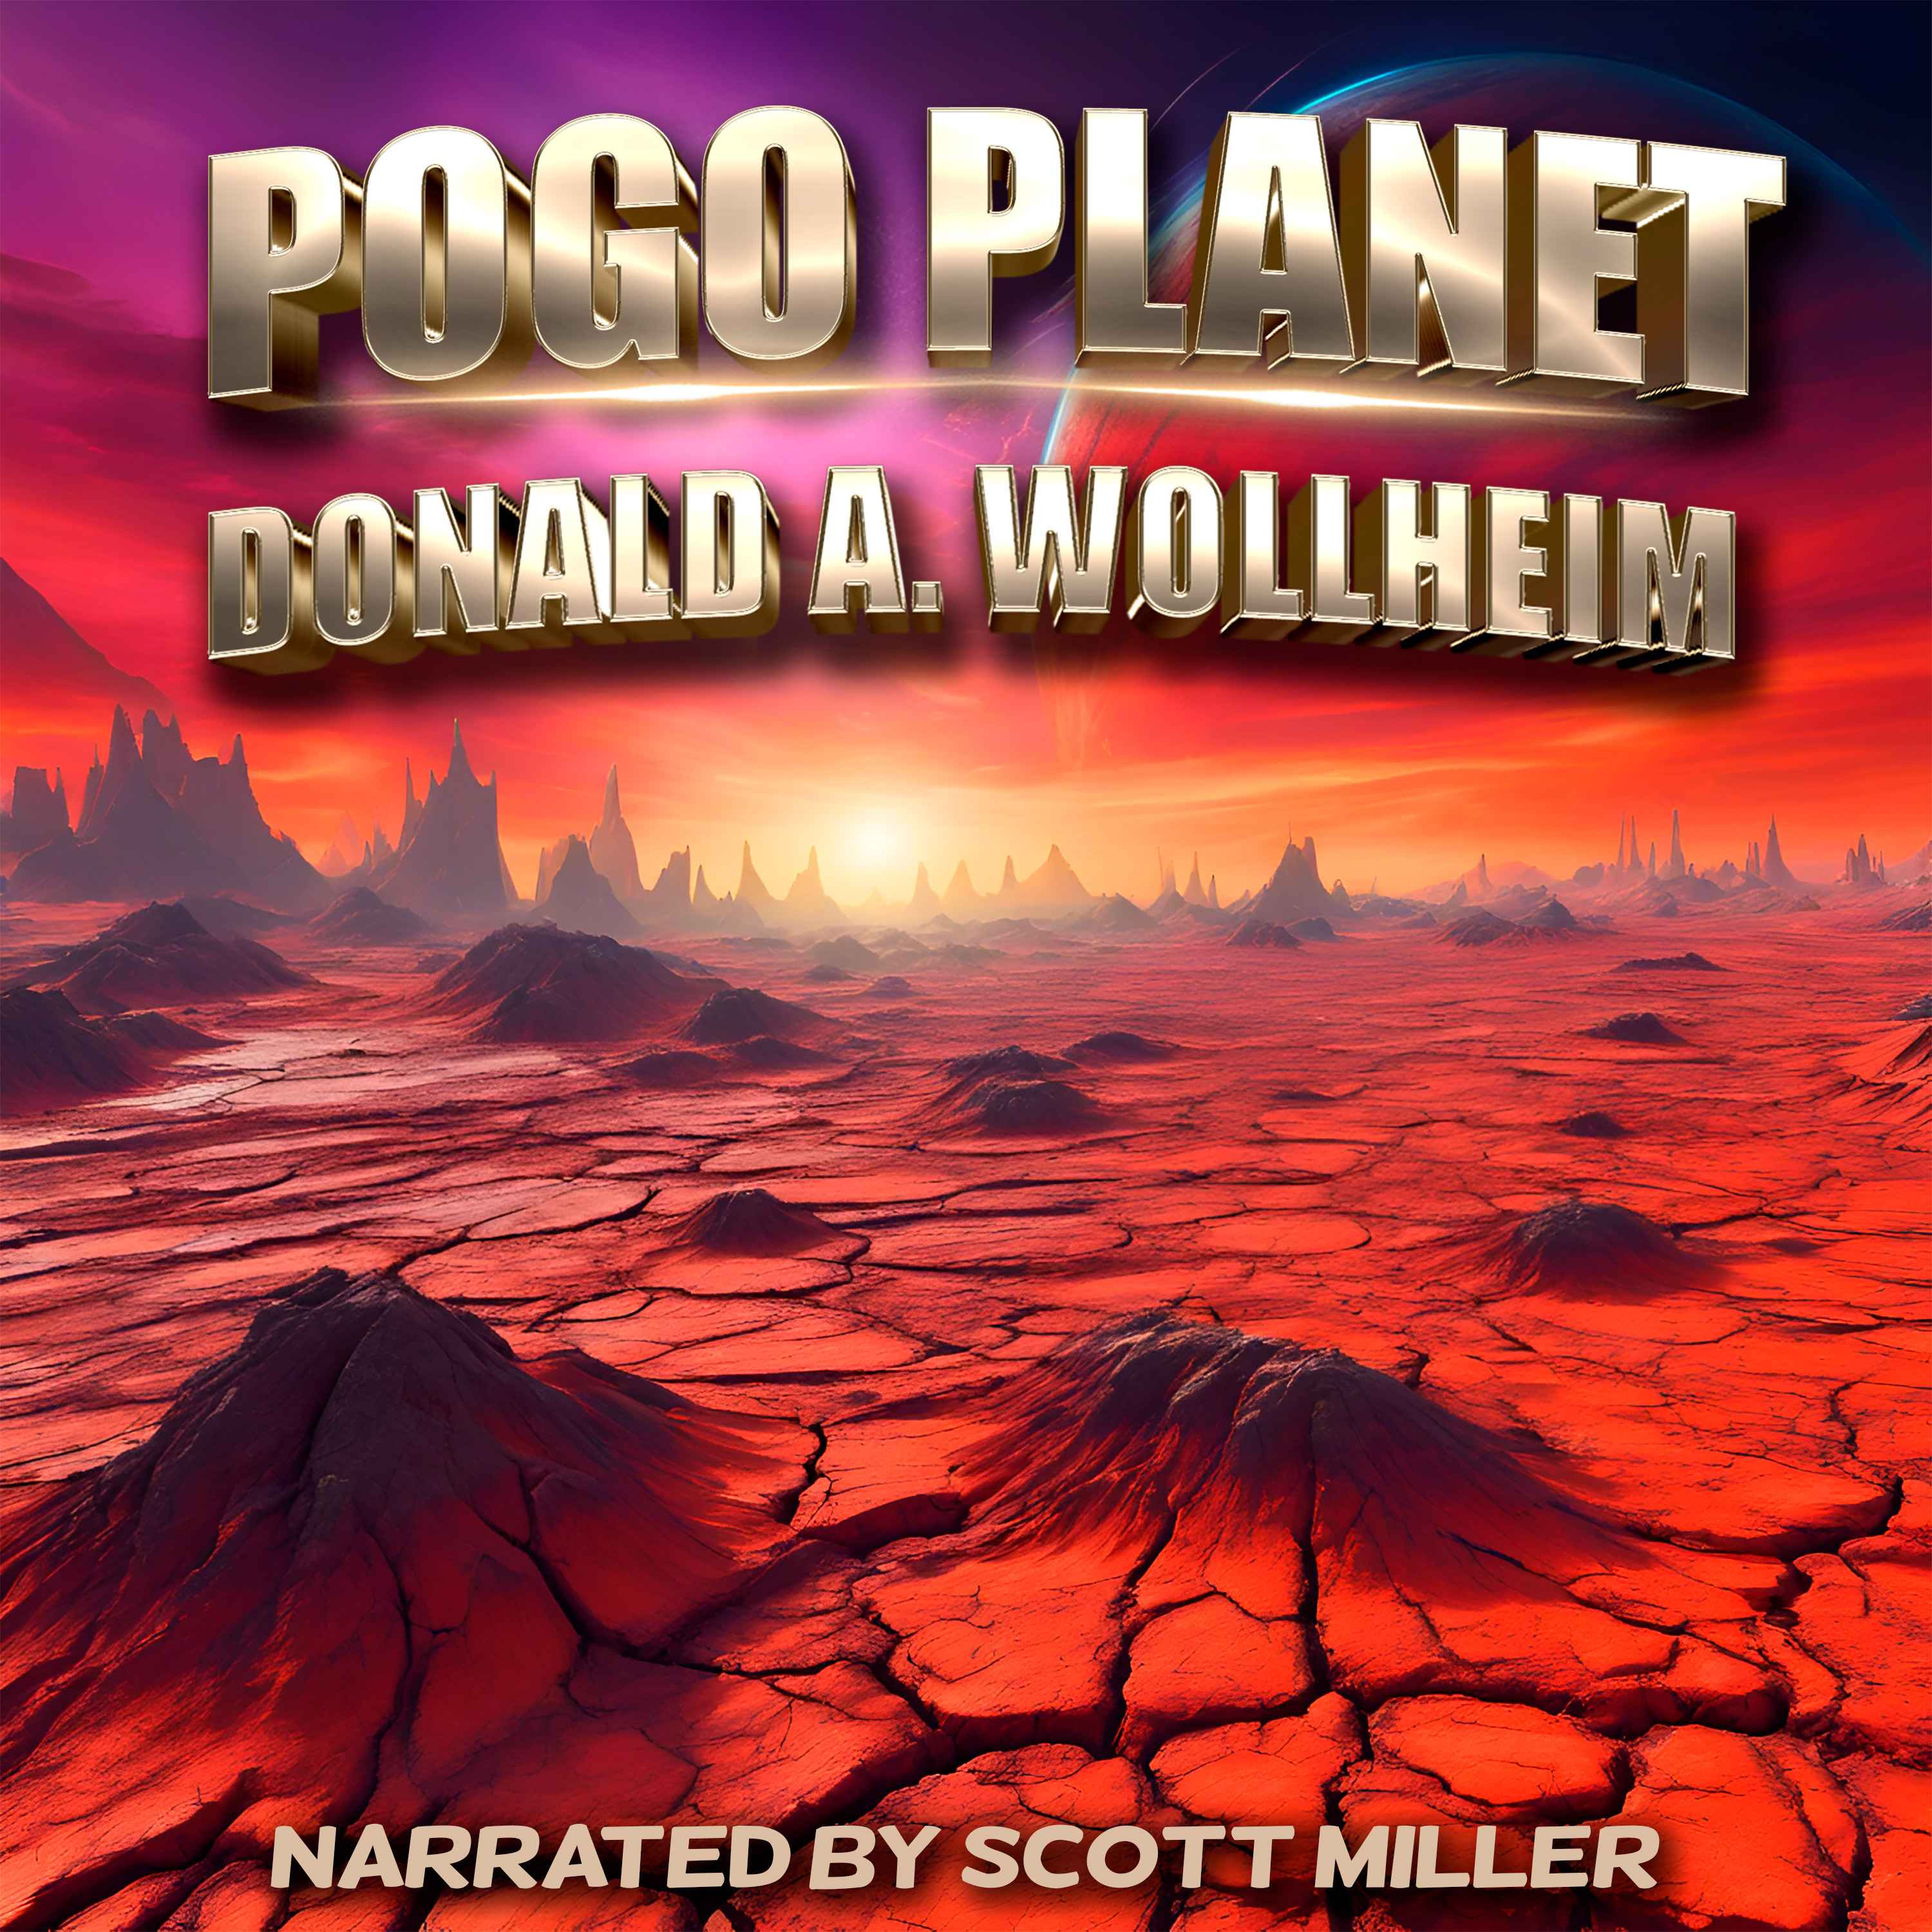 Pogo Planet by Donald A. Wollheim - Short Science Fiction Story From the 1940s